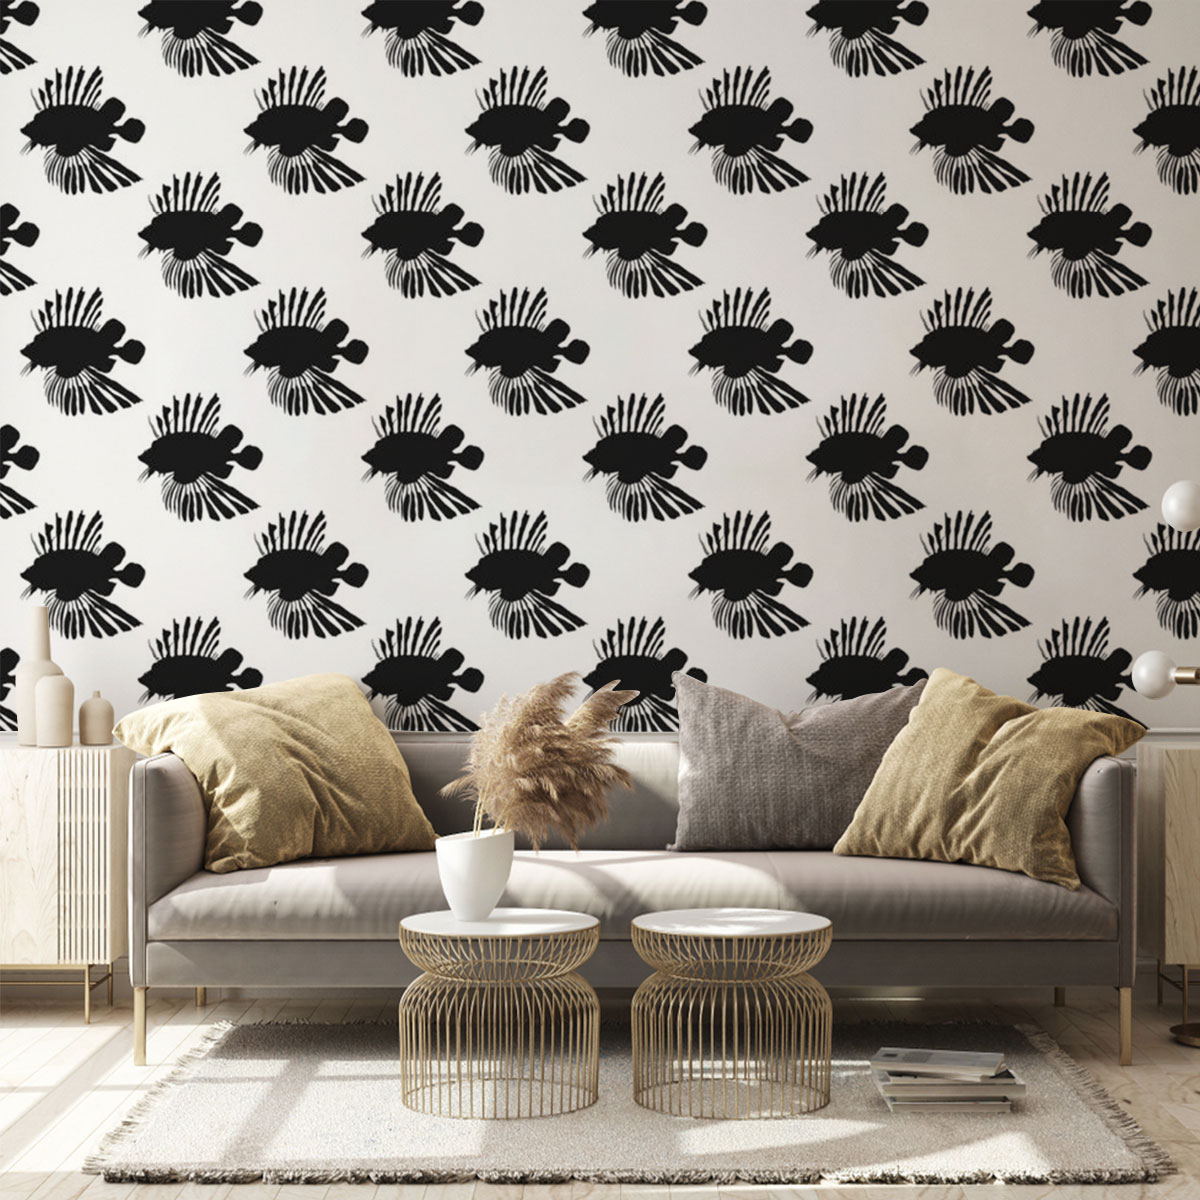 Black Lionfish On White Wall Mural